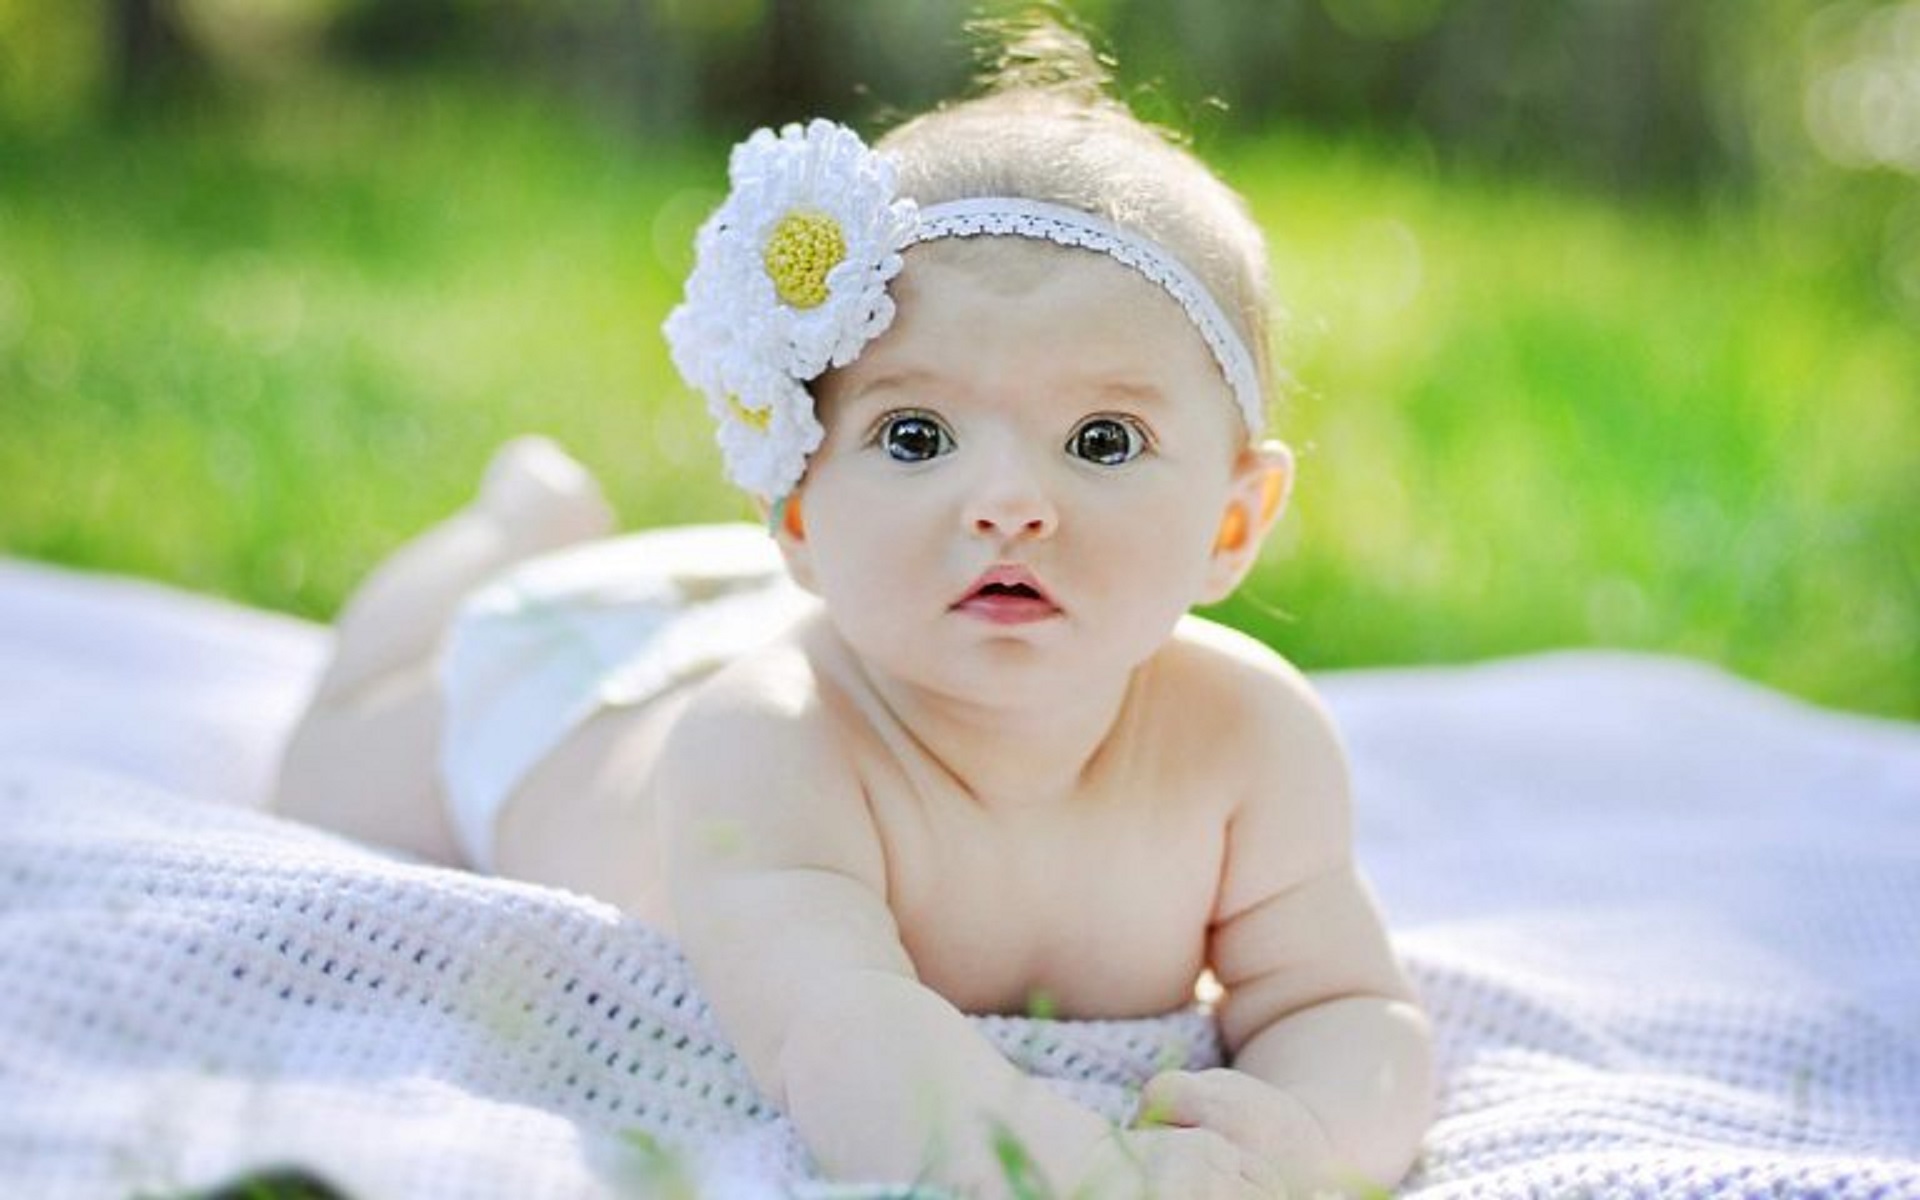 cutest baby 2017 picture